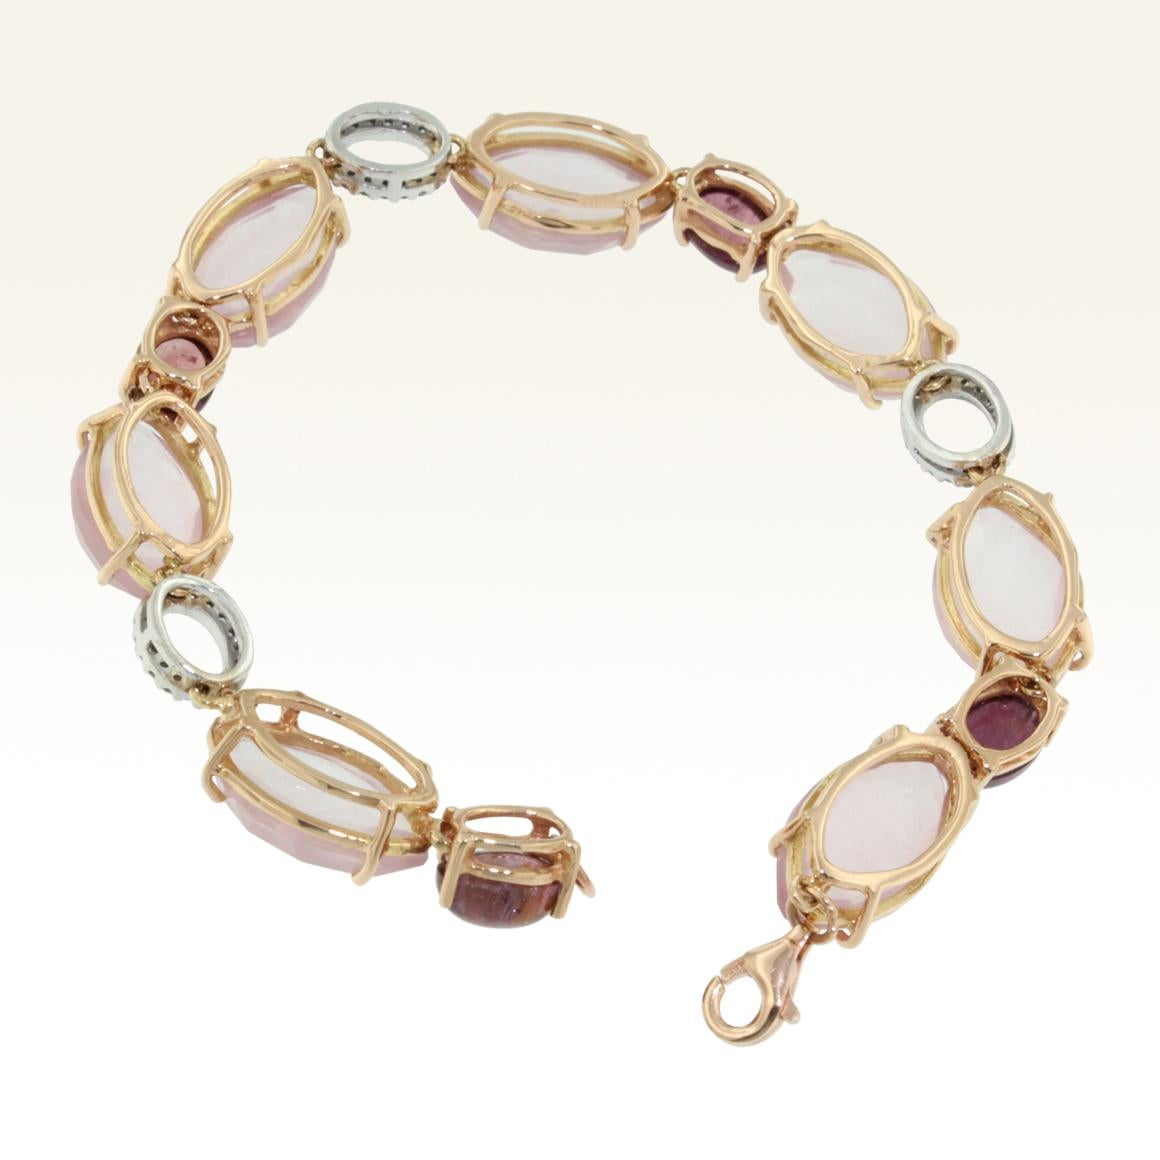 Oval Cut 18k Rose and White Gold with Pink Quartz Tourmaline and White Diamonds Bracelet